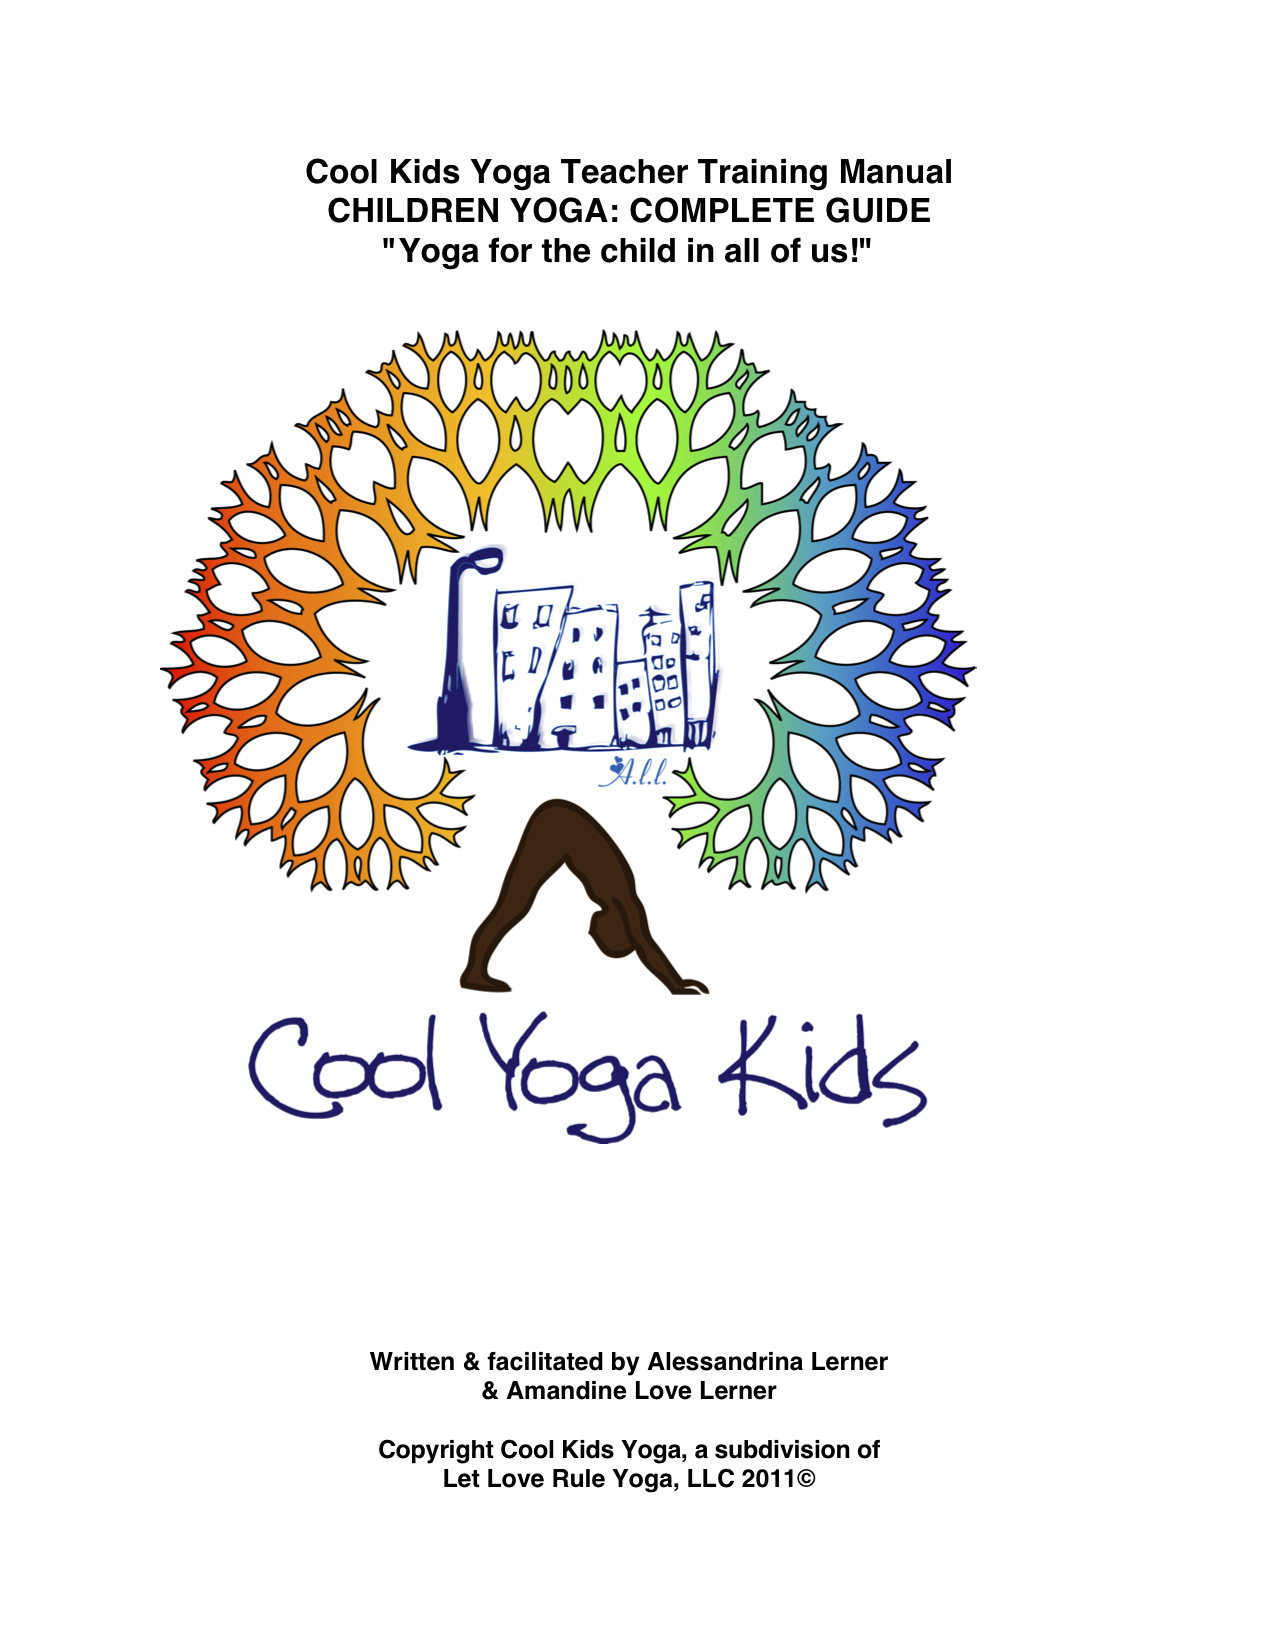 Children Yoga: Complete Guide - The Most Complete Methodology to Teaching Yoga to Children of All Ages